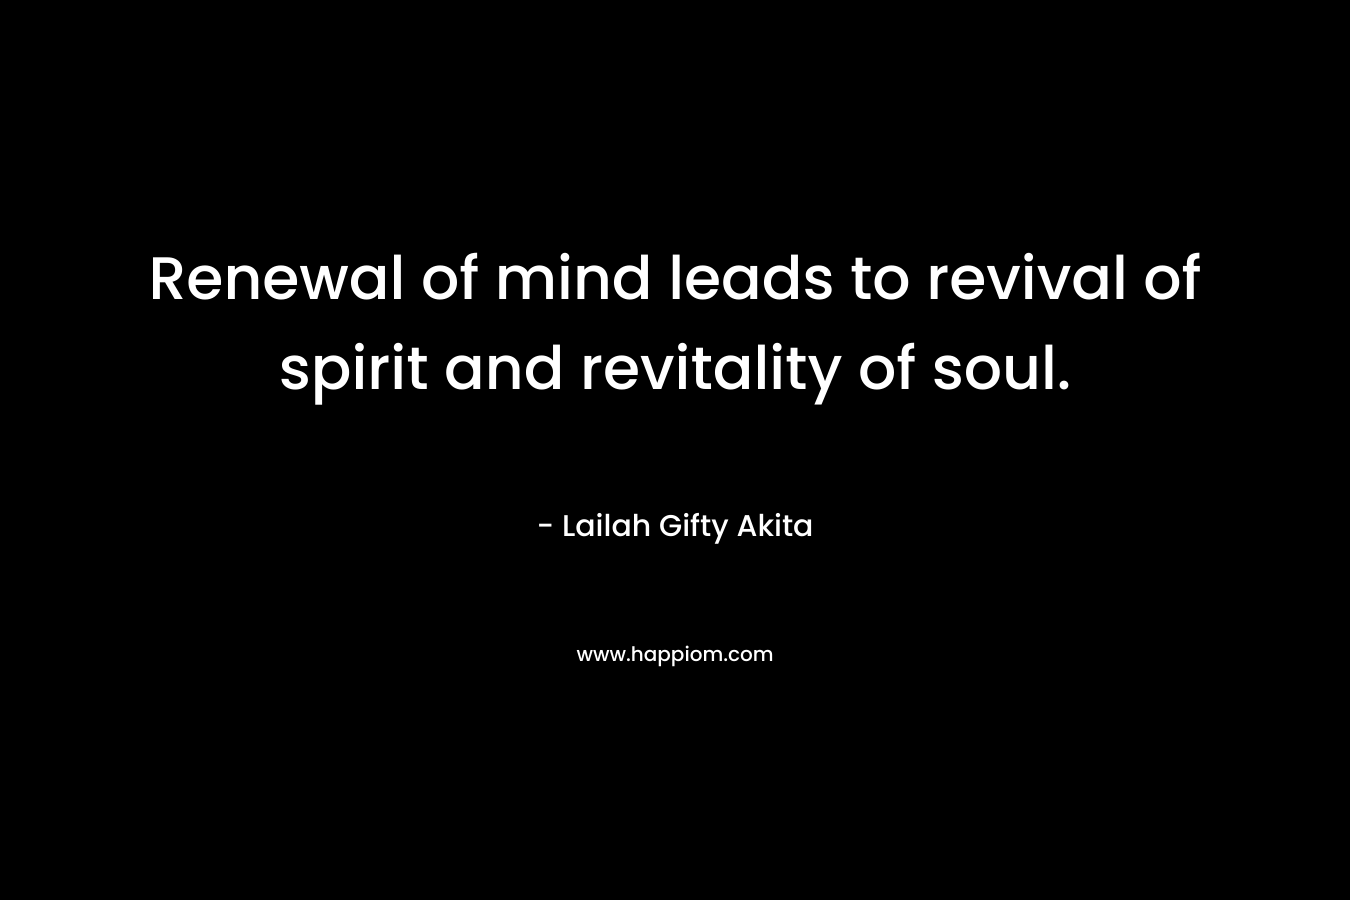 Renewal of mind leads to revival of spirit and revitality of soul.